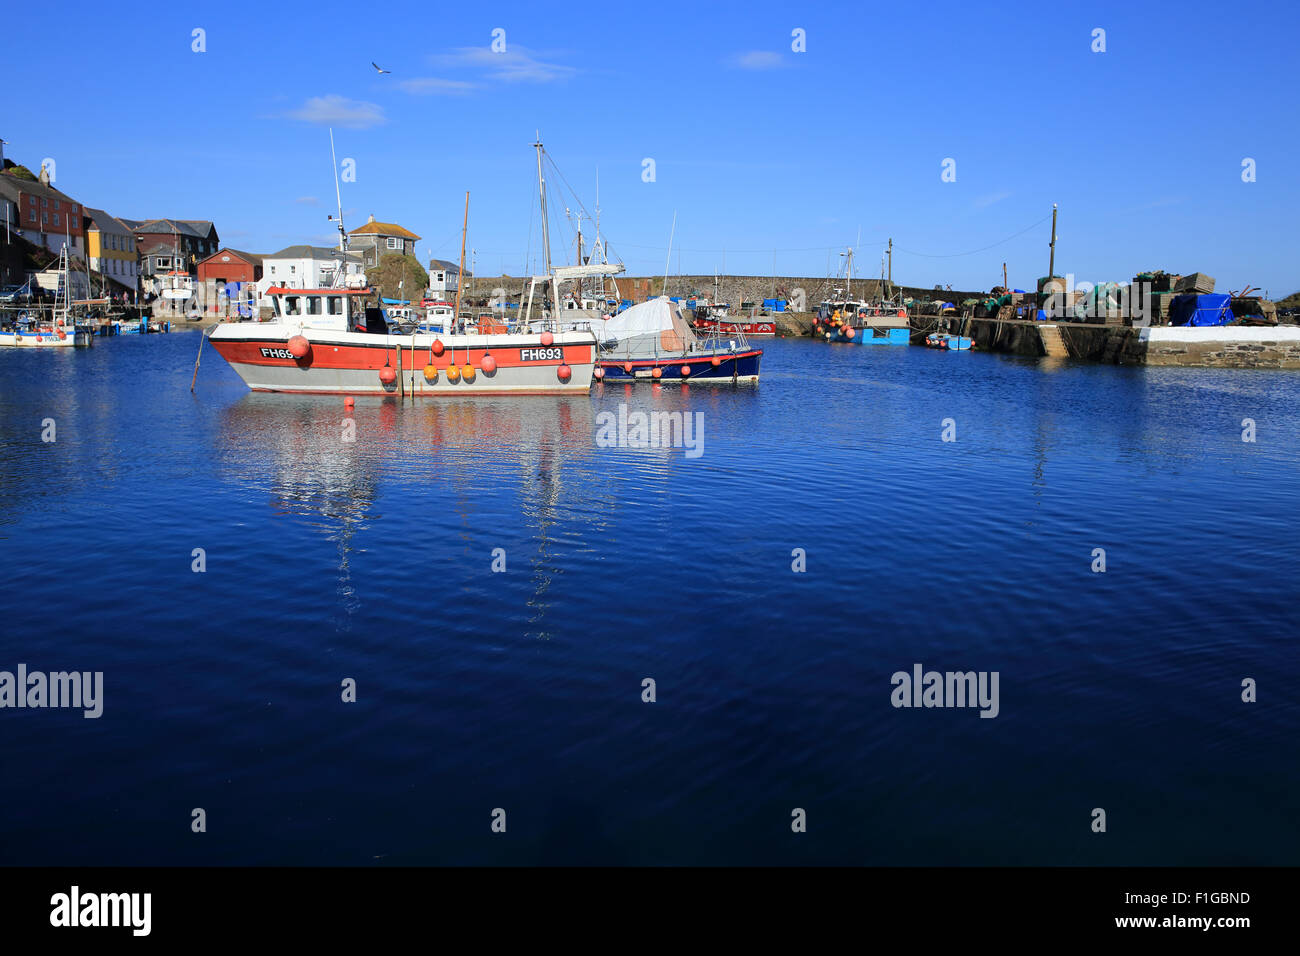 Fishing boats on a fine Spring day in the Inner Harbour of Mevagissey, Cornwall, England, UK. Stock Photo